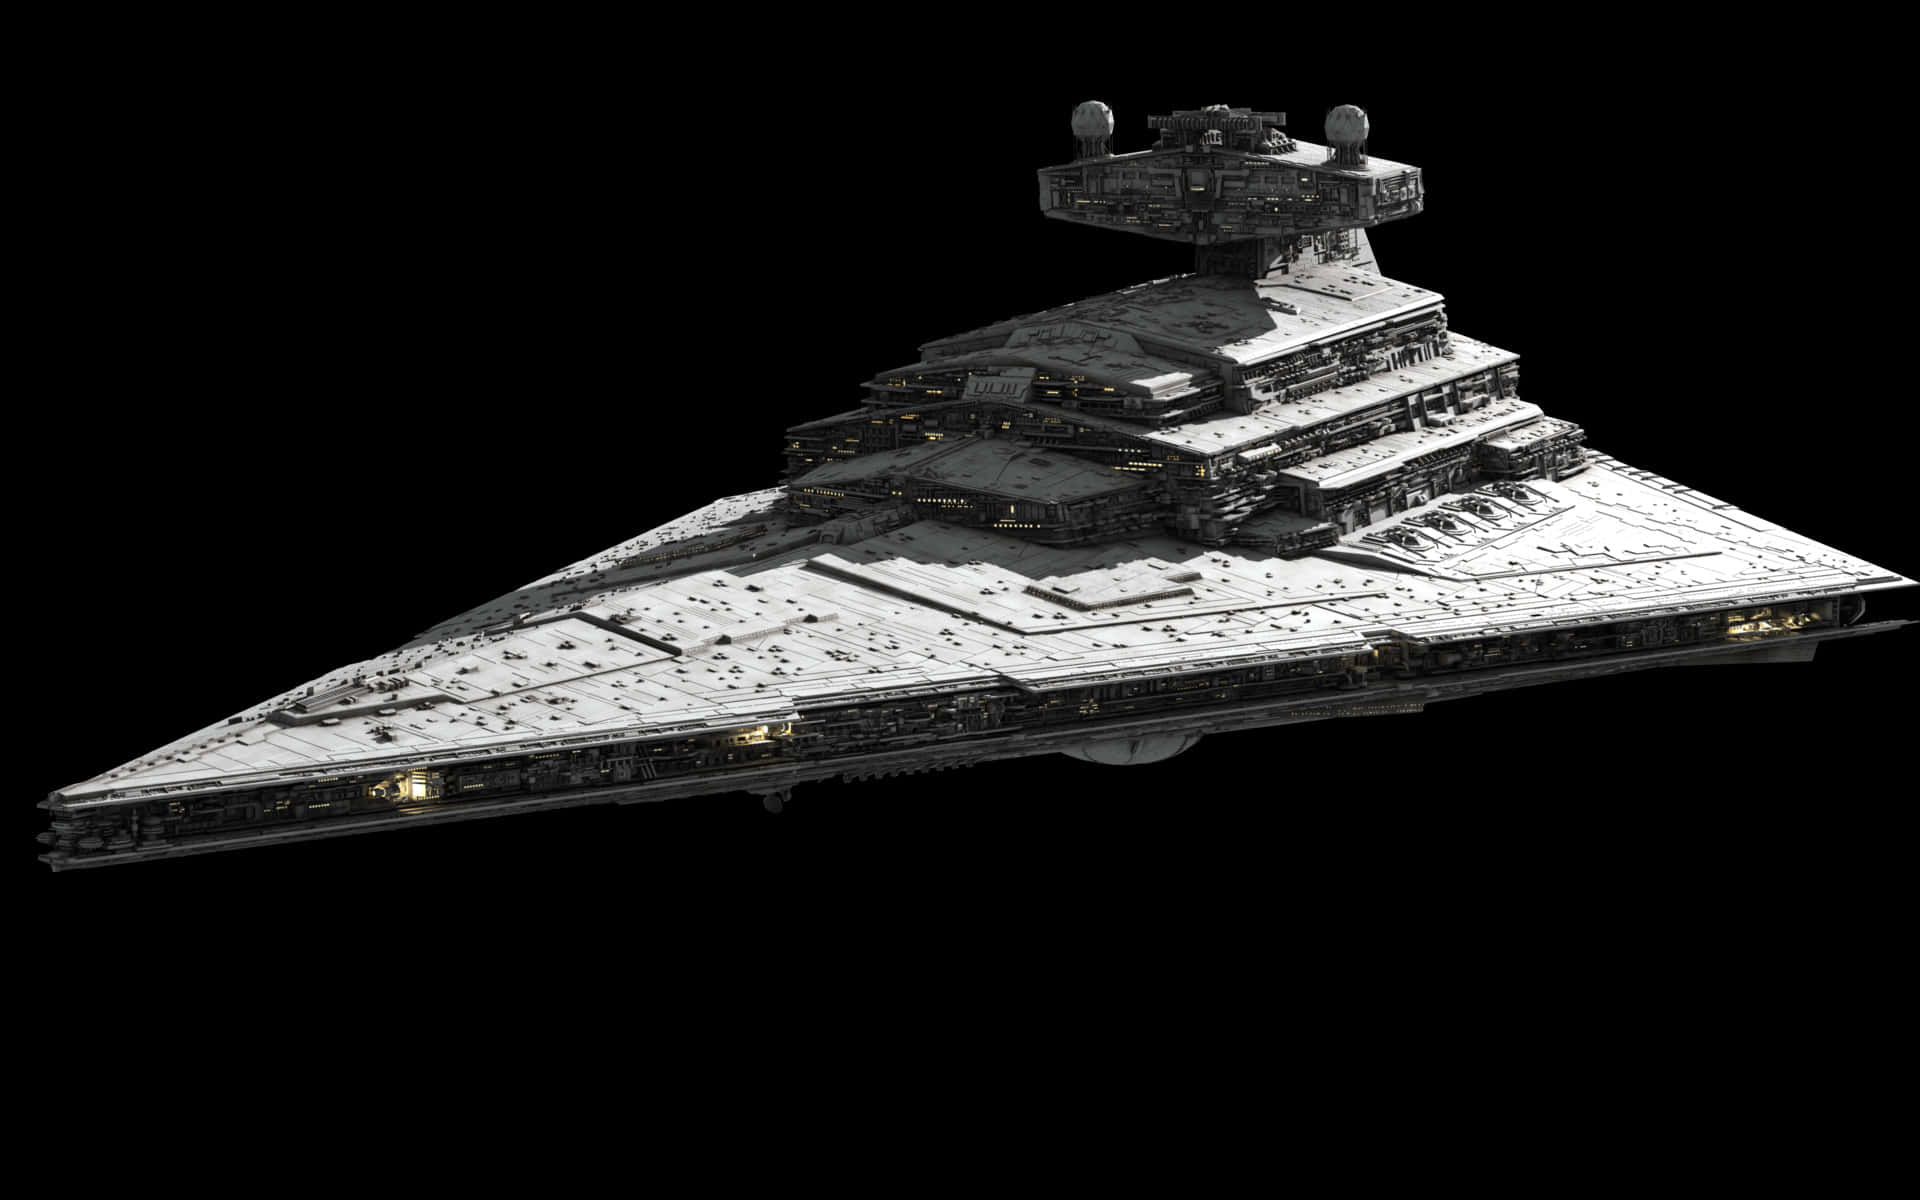 Daggers-Shaped Imperial Class Star Destroyer Wallpaper